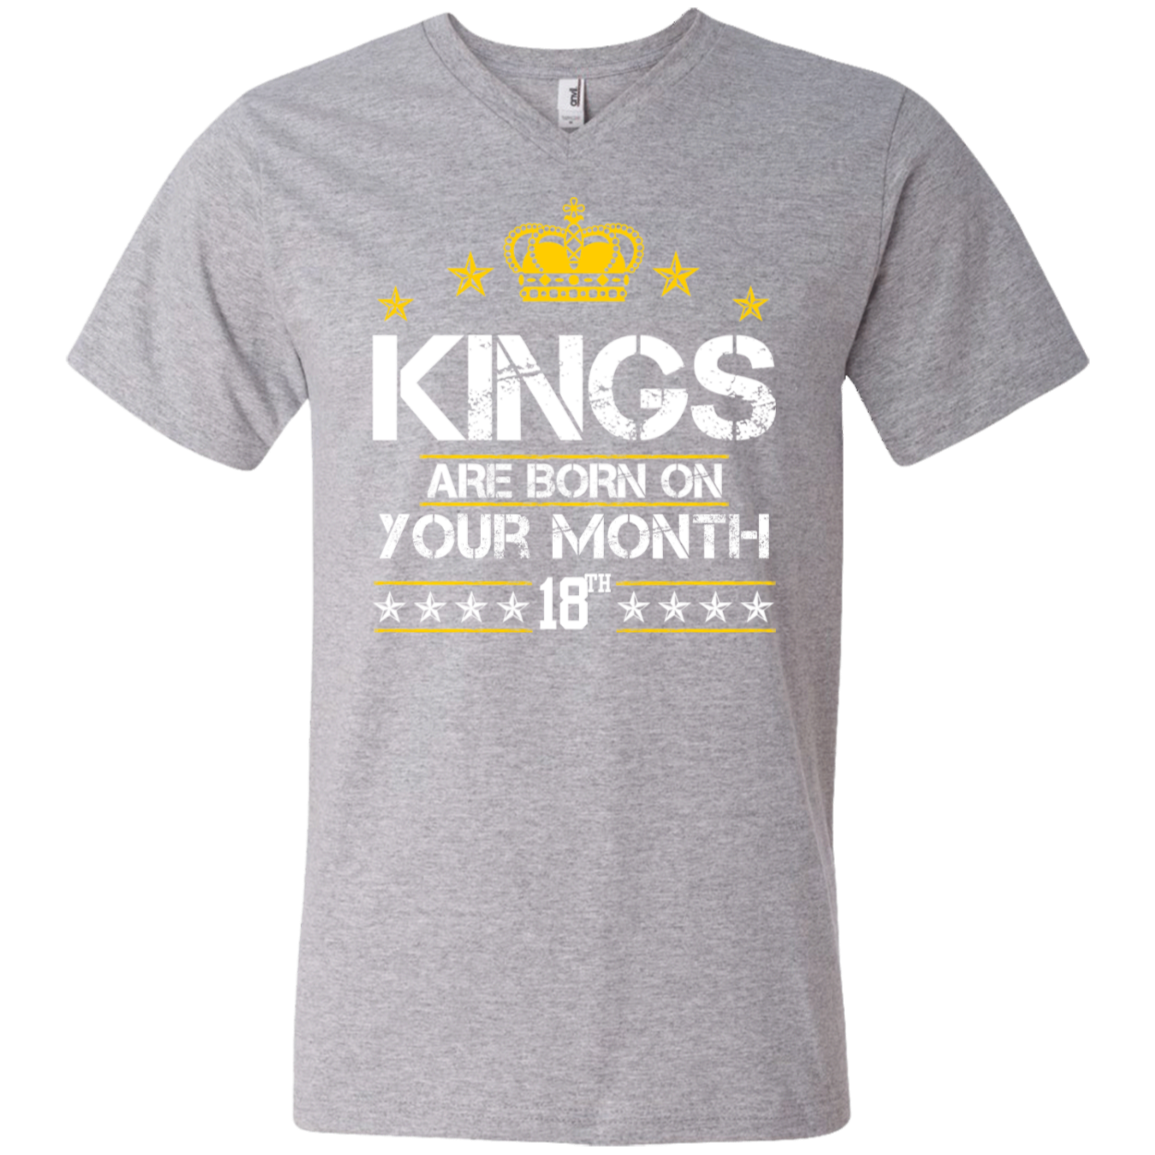 Men's V-Neck T-Shirt-Kings are Born On (your month/date) - JaZazzy 